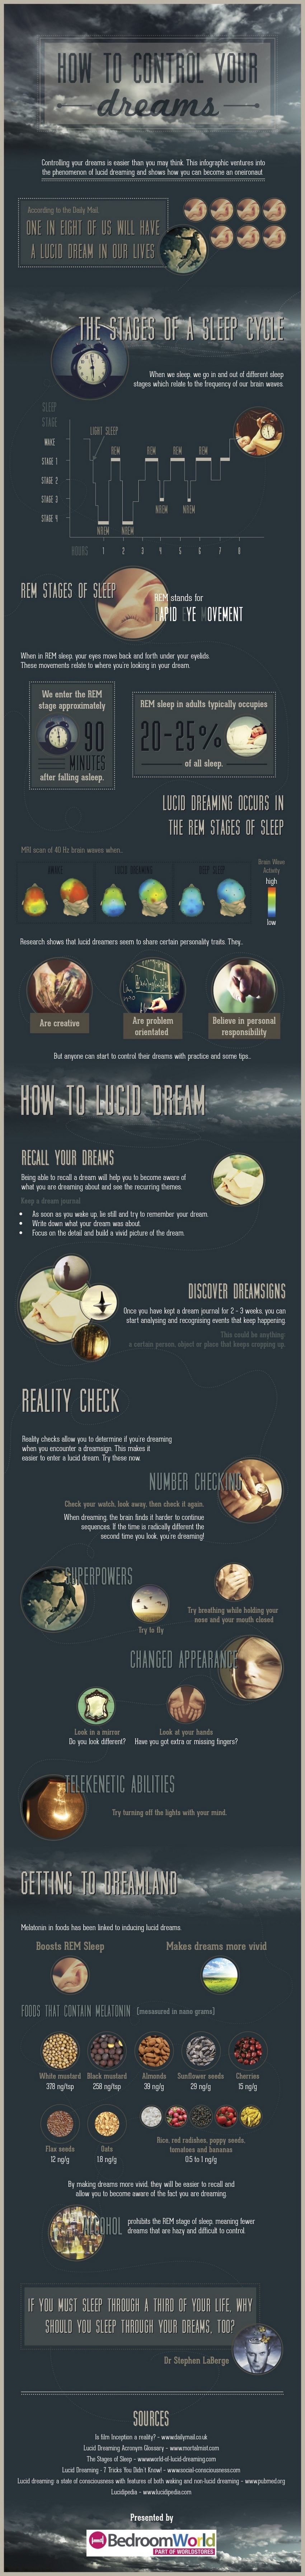 how-to-control-your-dreams-r-charmingchats